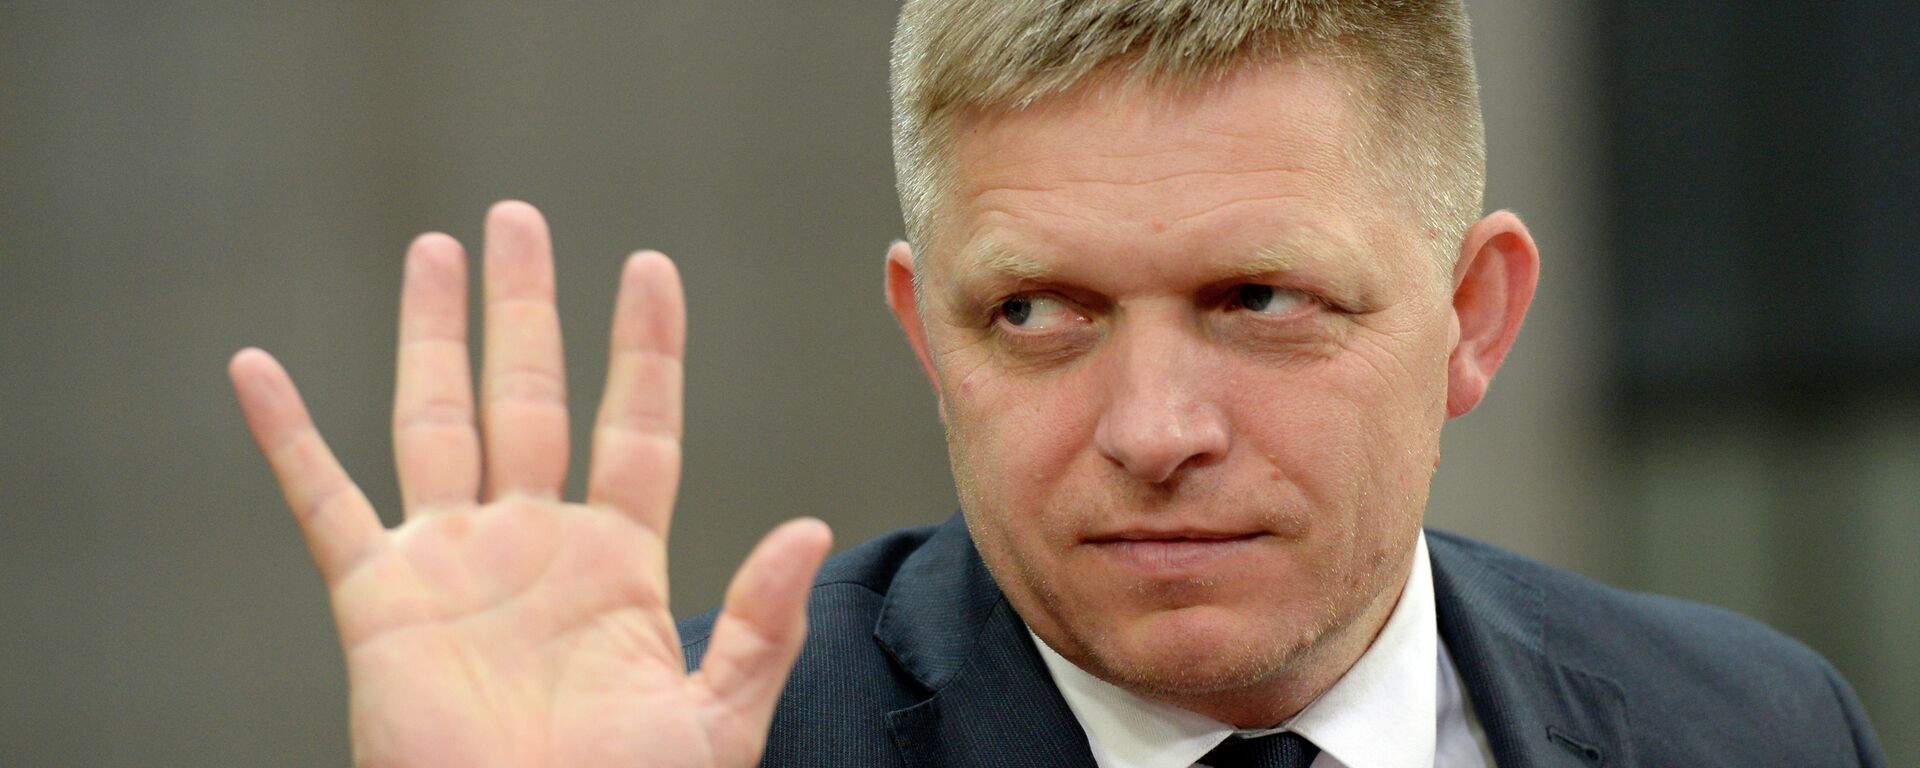 Slovakia's Prime minister Robert Fico arrives for an emergency Eurogroup finance ministers' meeting on Greece at the European Council in Brussels, on June 22, 2015 - Sputnik International, 1920, 29.09.2023